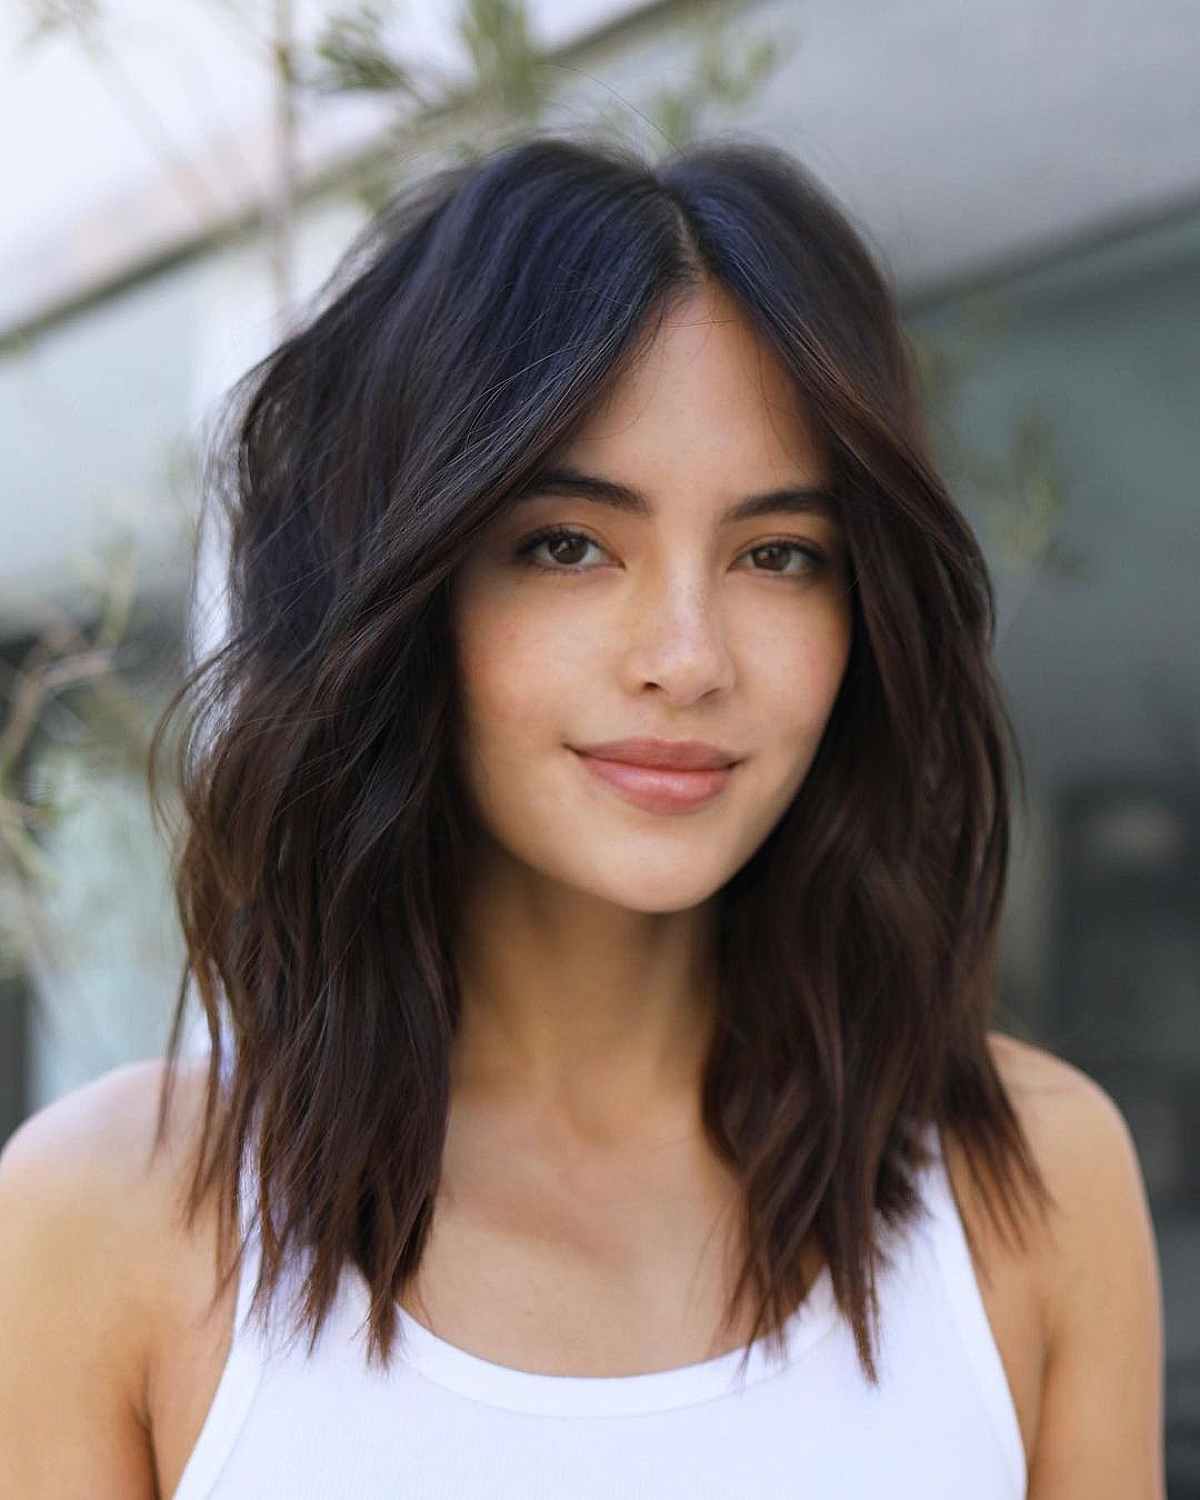 21 Medium Length Bob Hairstyles You'll Want to Copy - Hairstyles Weekly